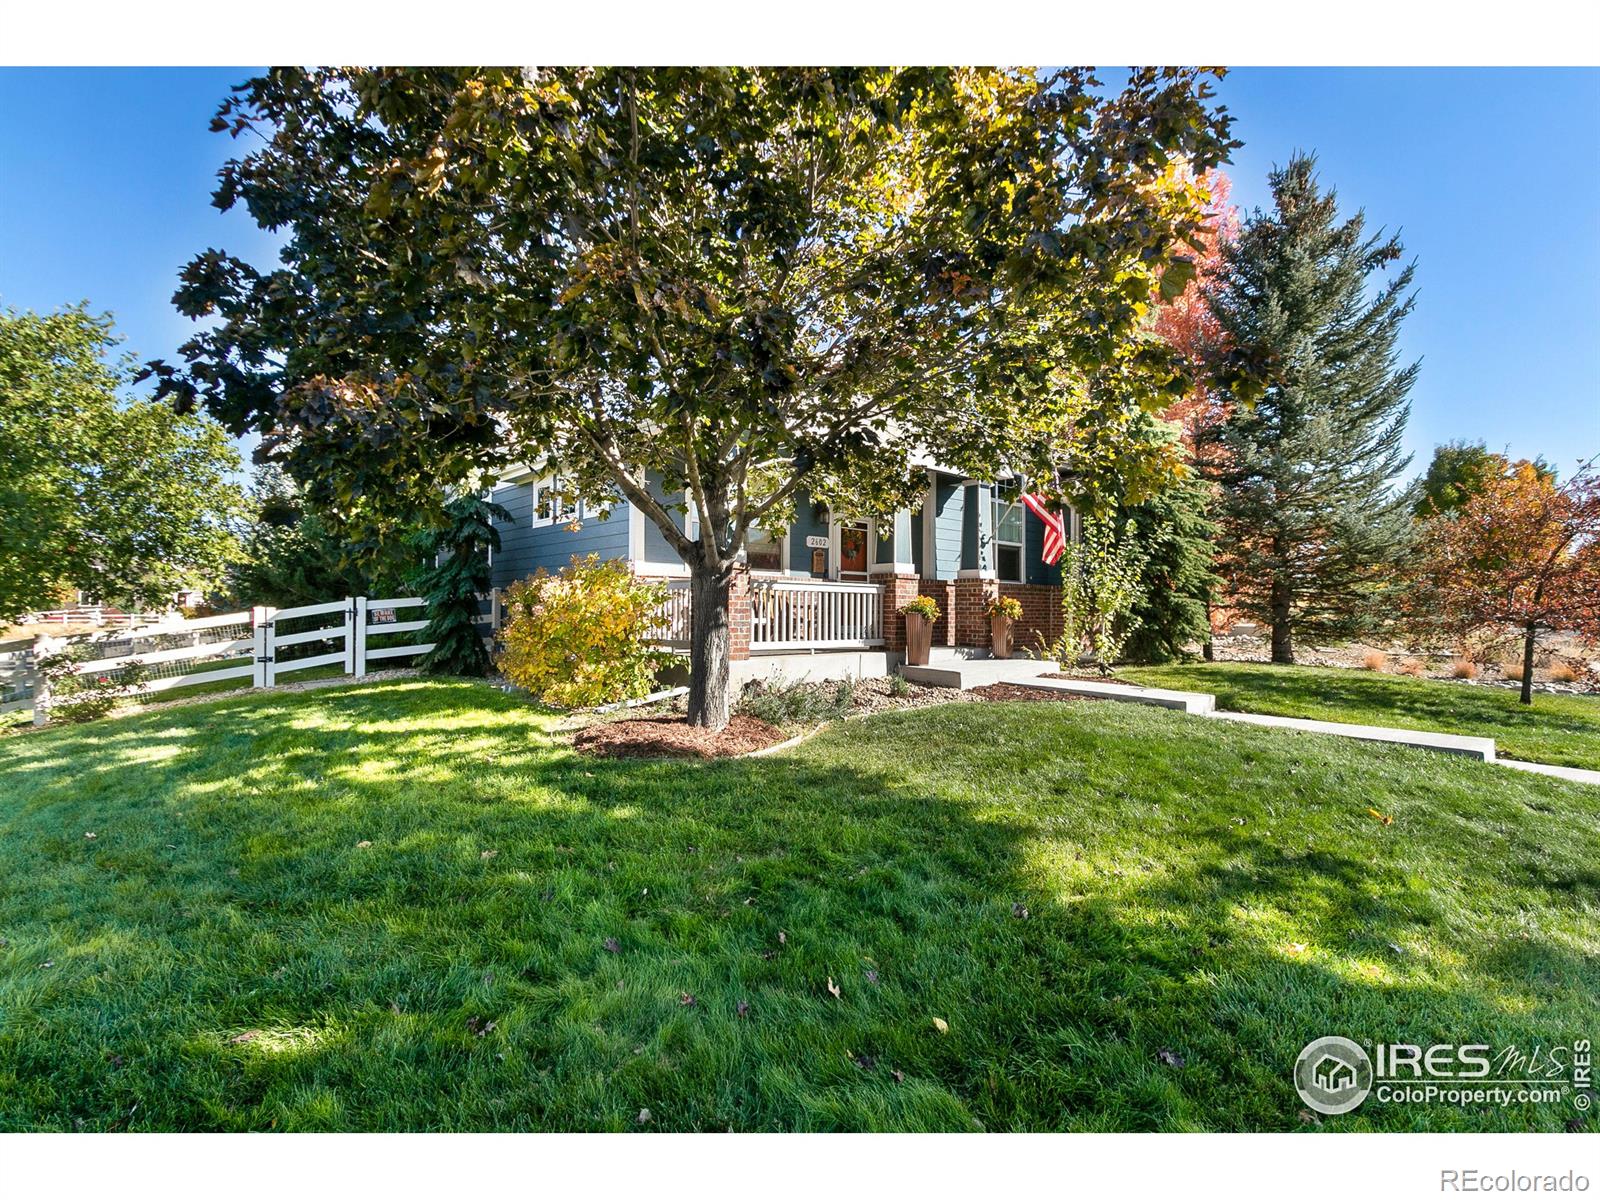 Report Image for 2602  William Neal Parkway,Fort Collins, Colorado